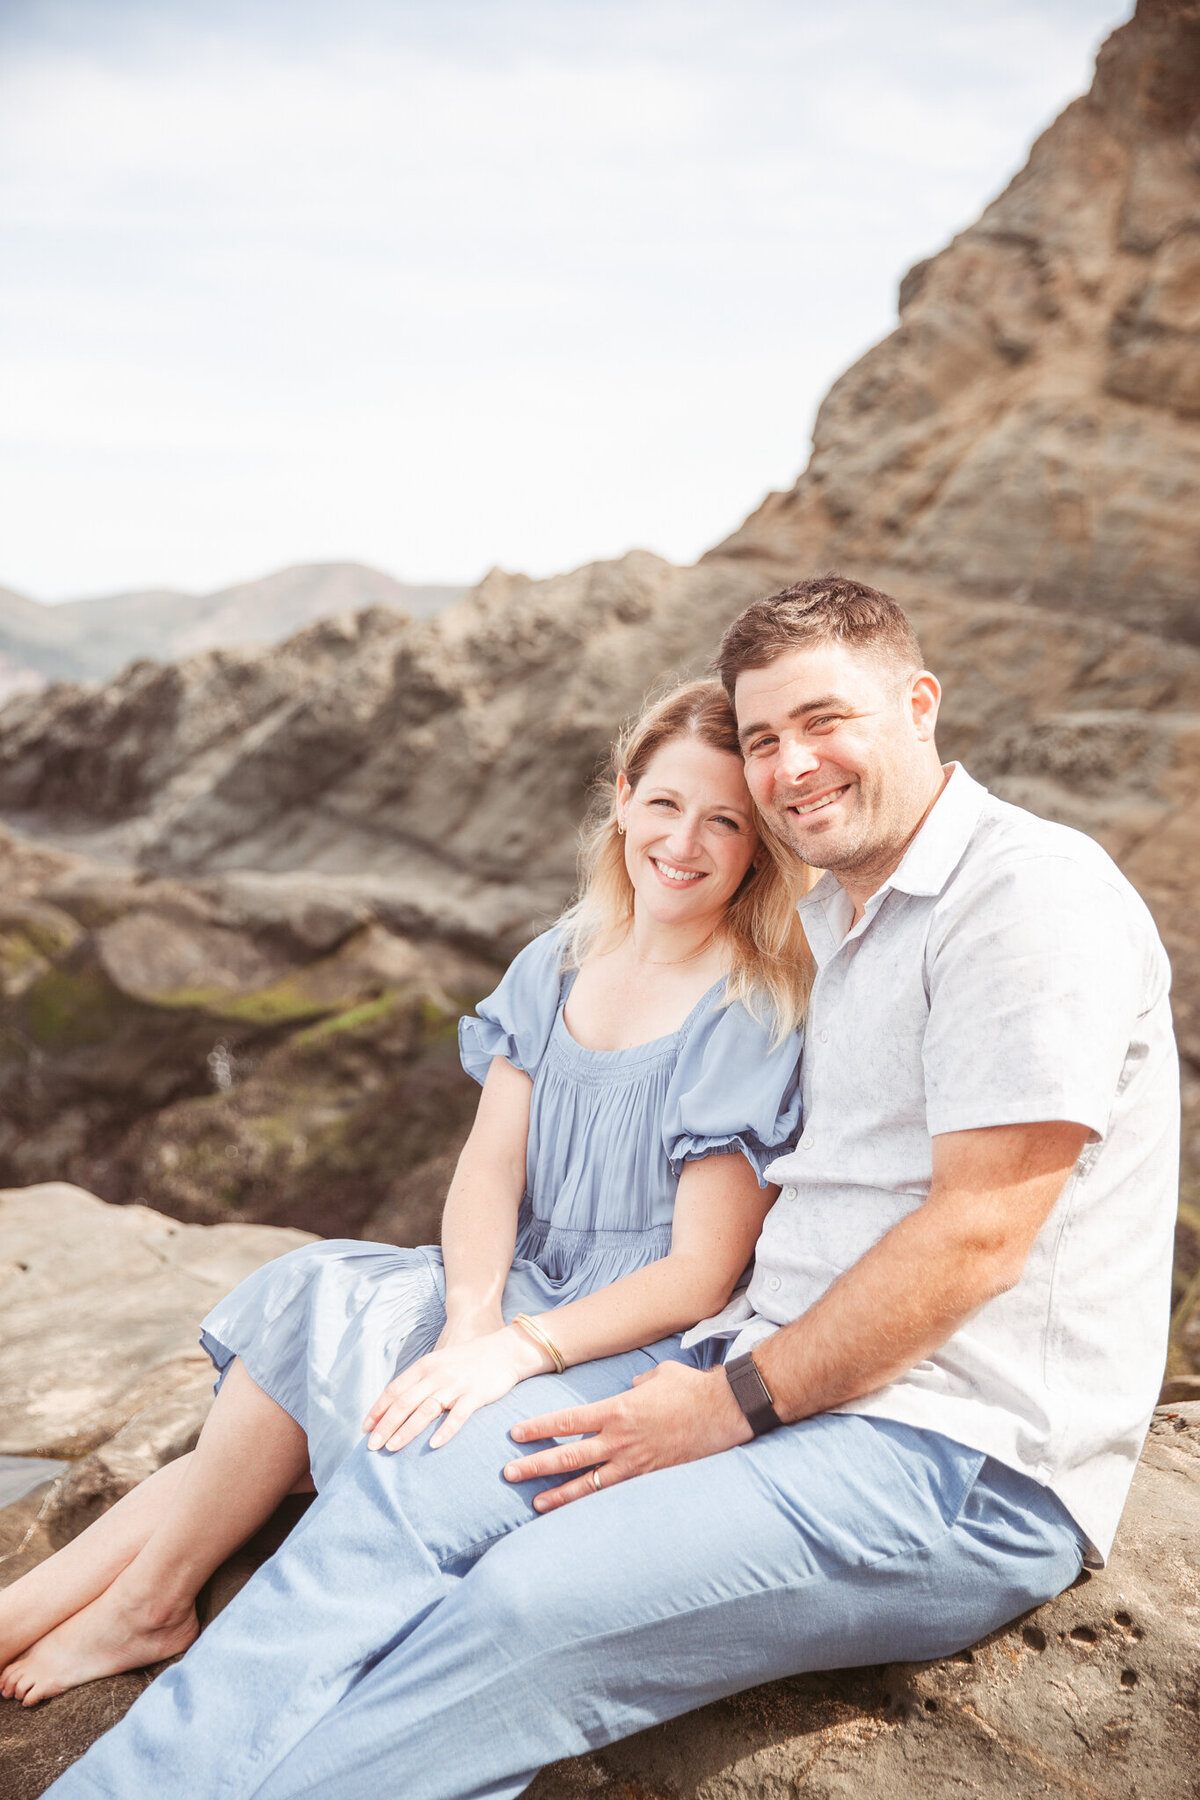 Luke and Leigh Huther-Flytographer-10 Year Anniversary-Baker Beach-San Francisco-Emily Pillon Photography-S-051222-10